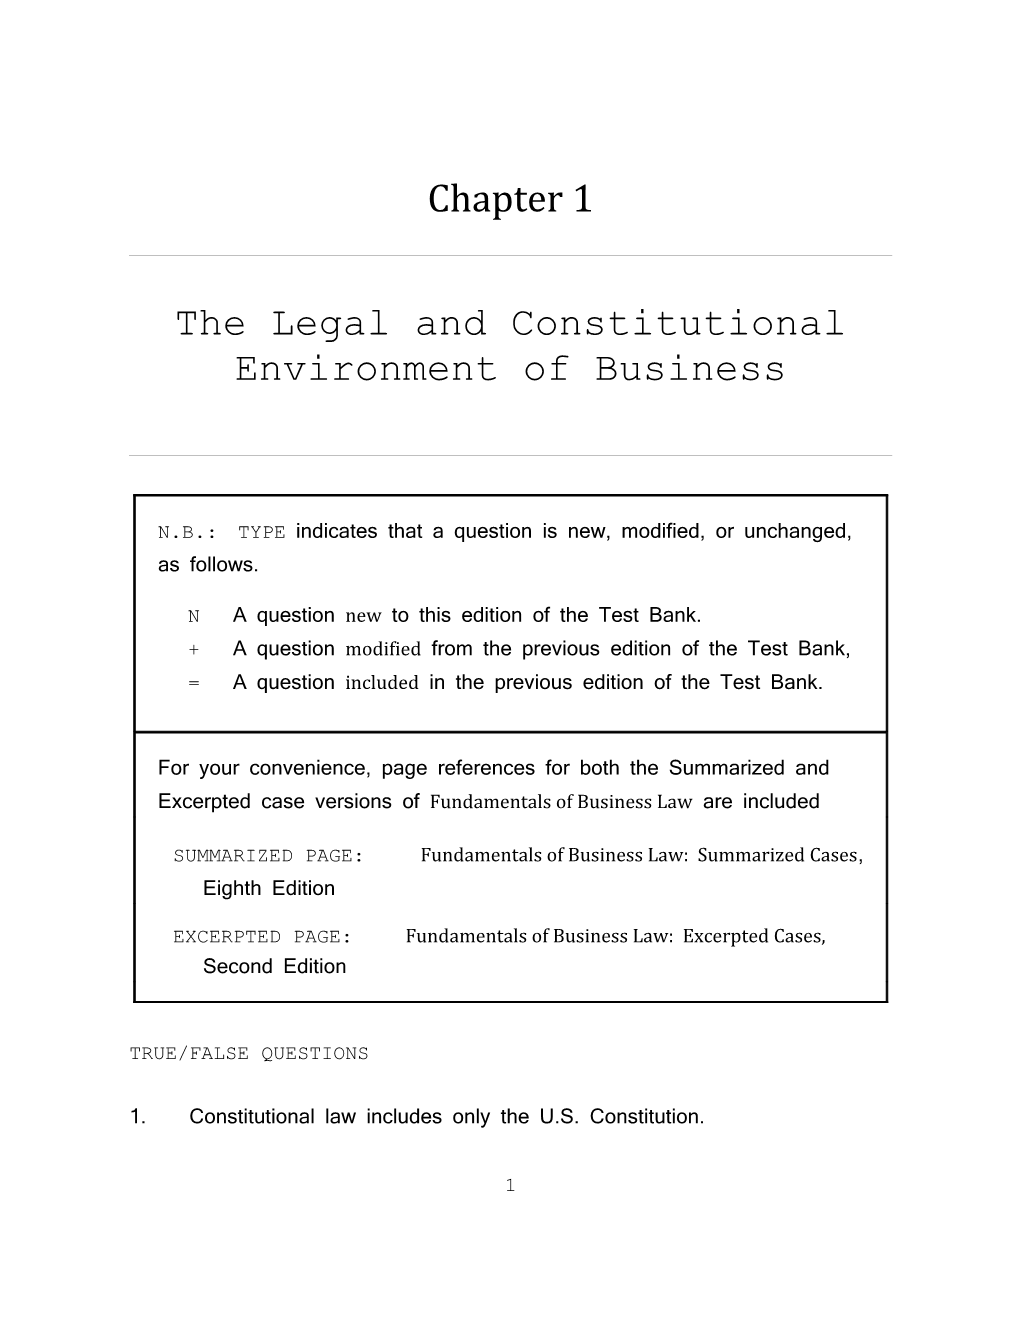 The Legal and Constitutional Environment of Business